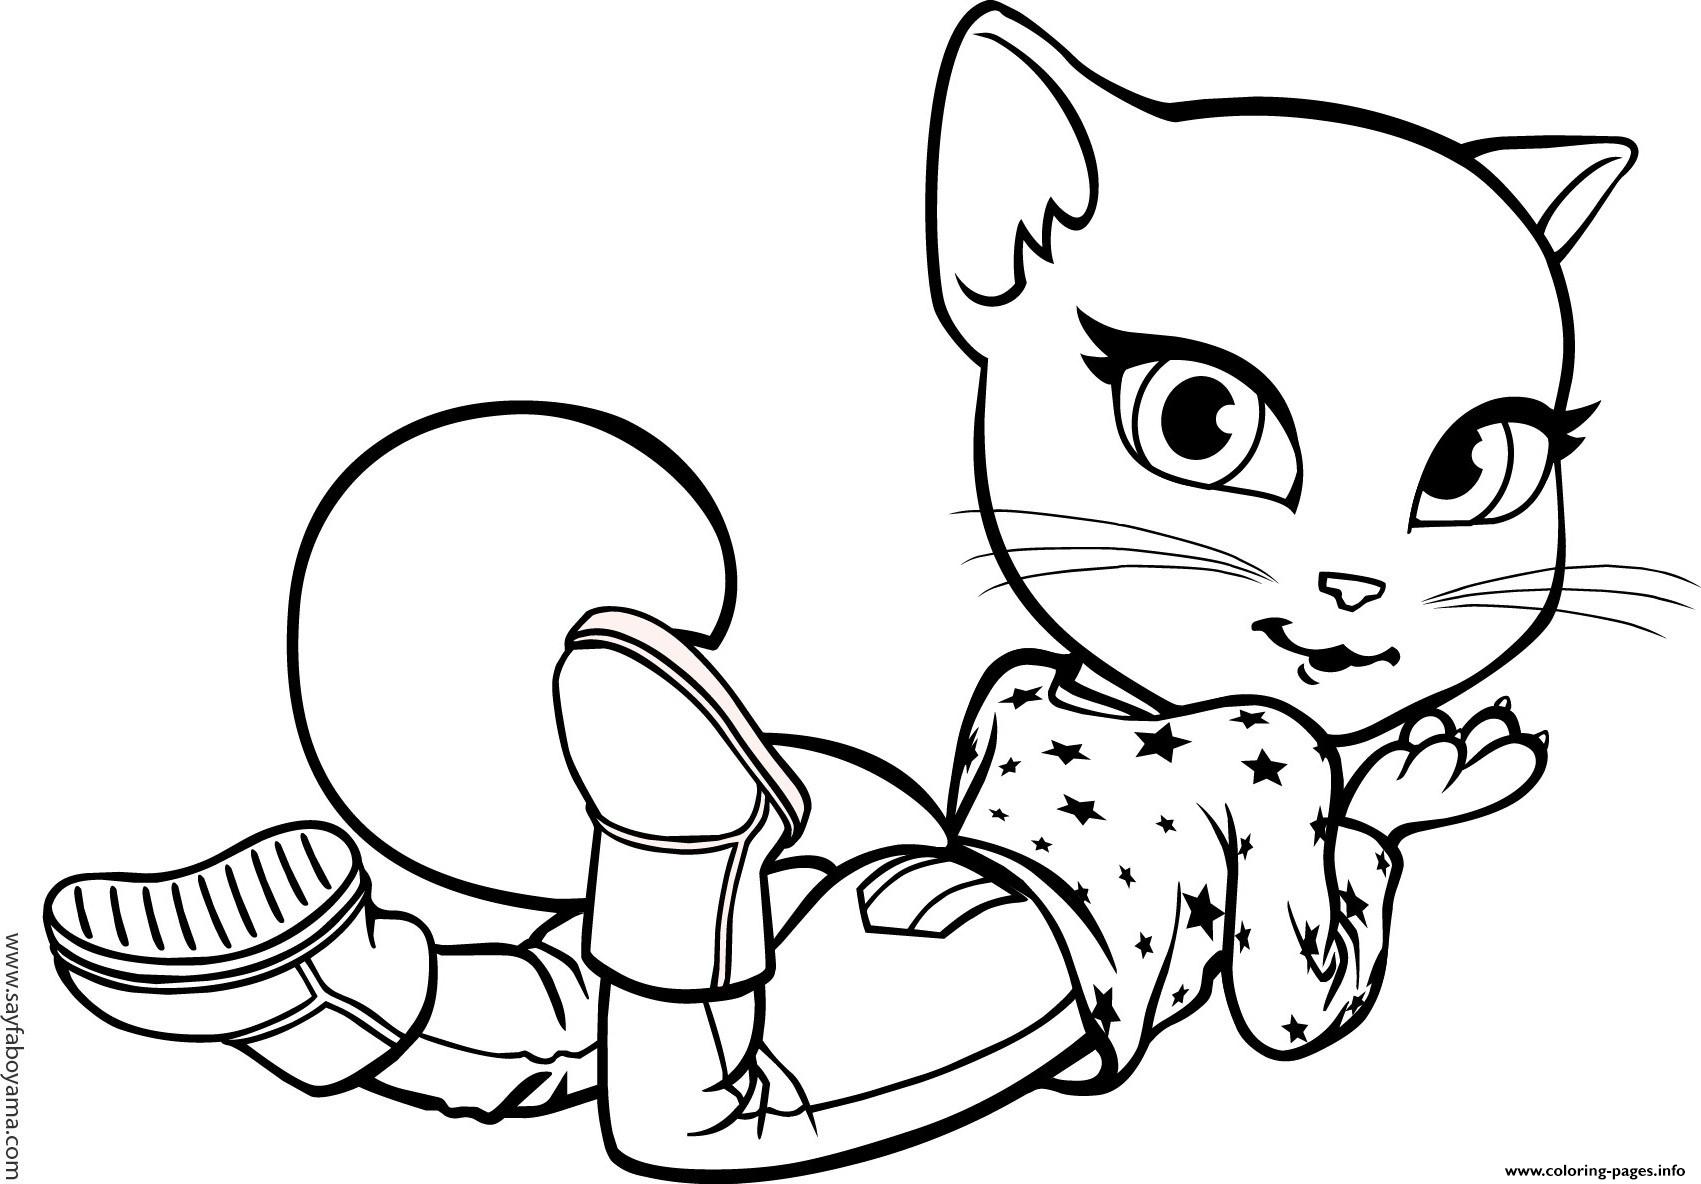 Talking Tom 8 Cool Coloring Page